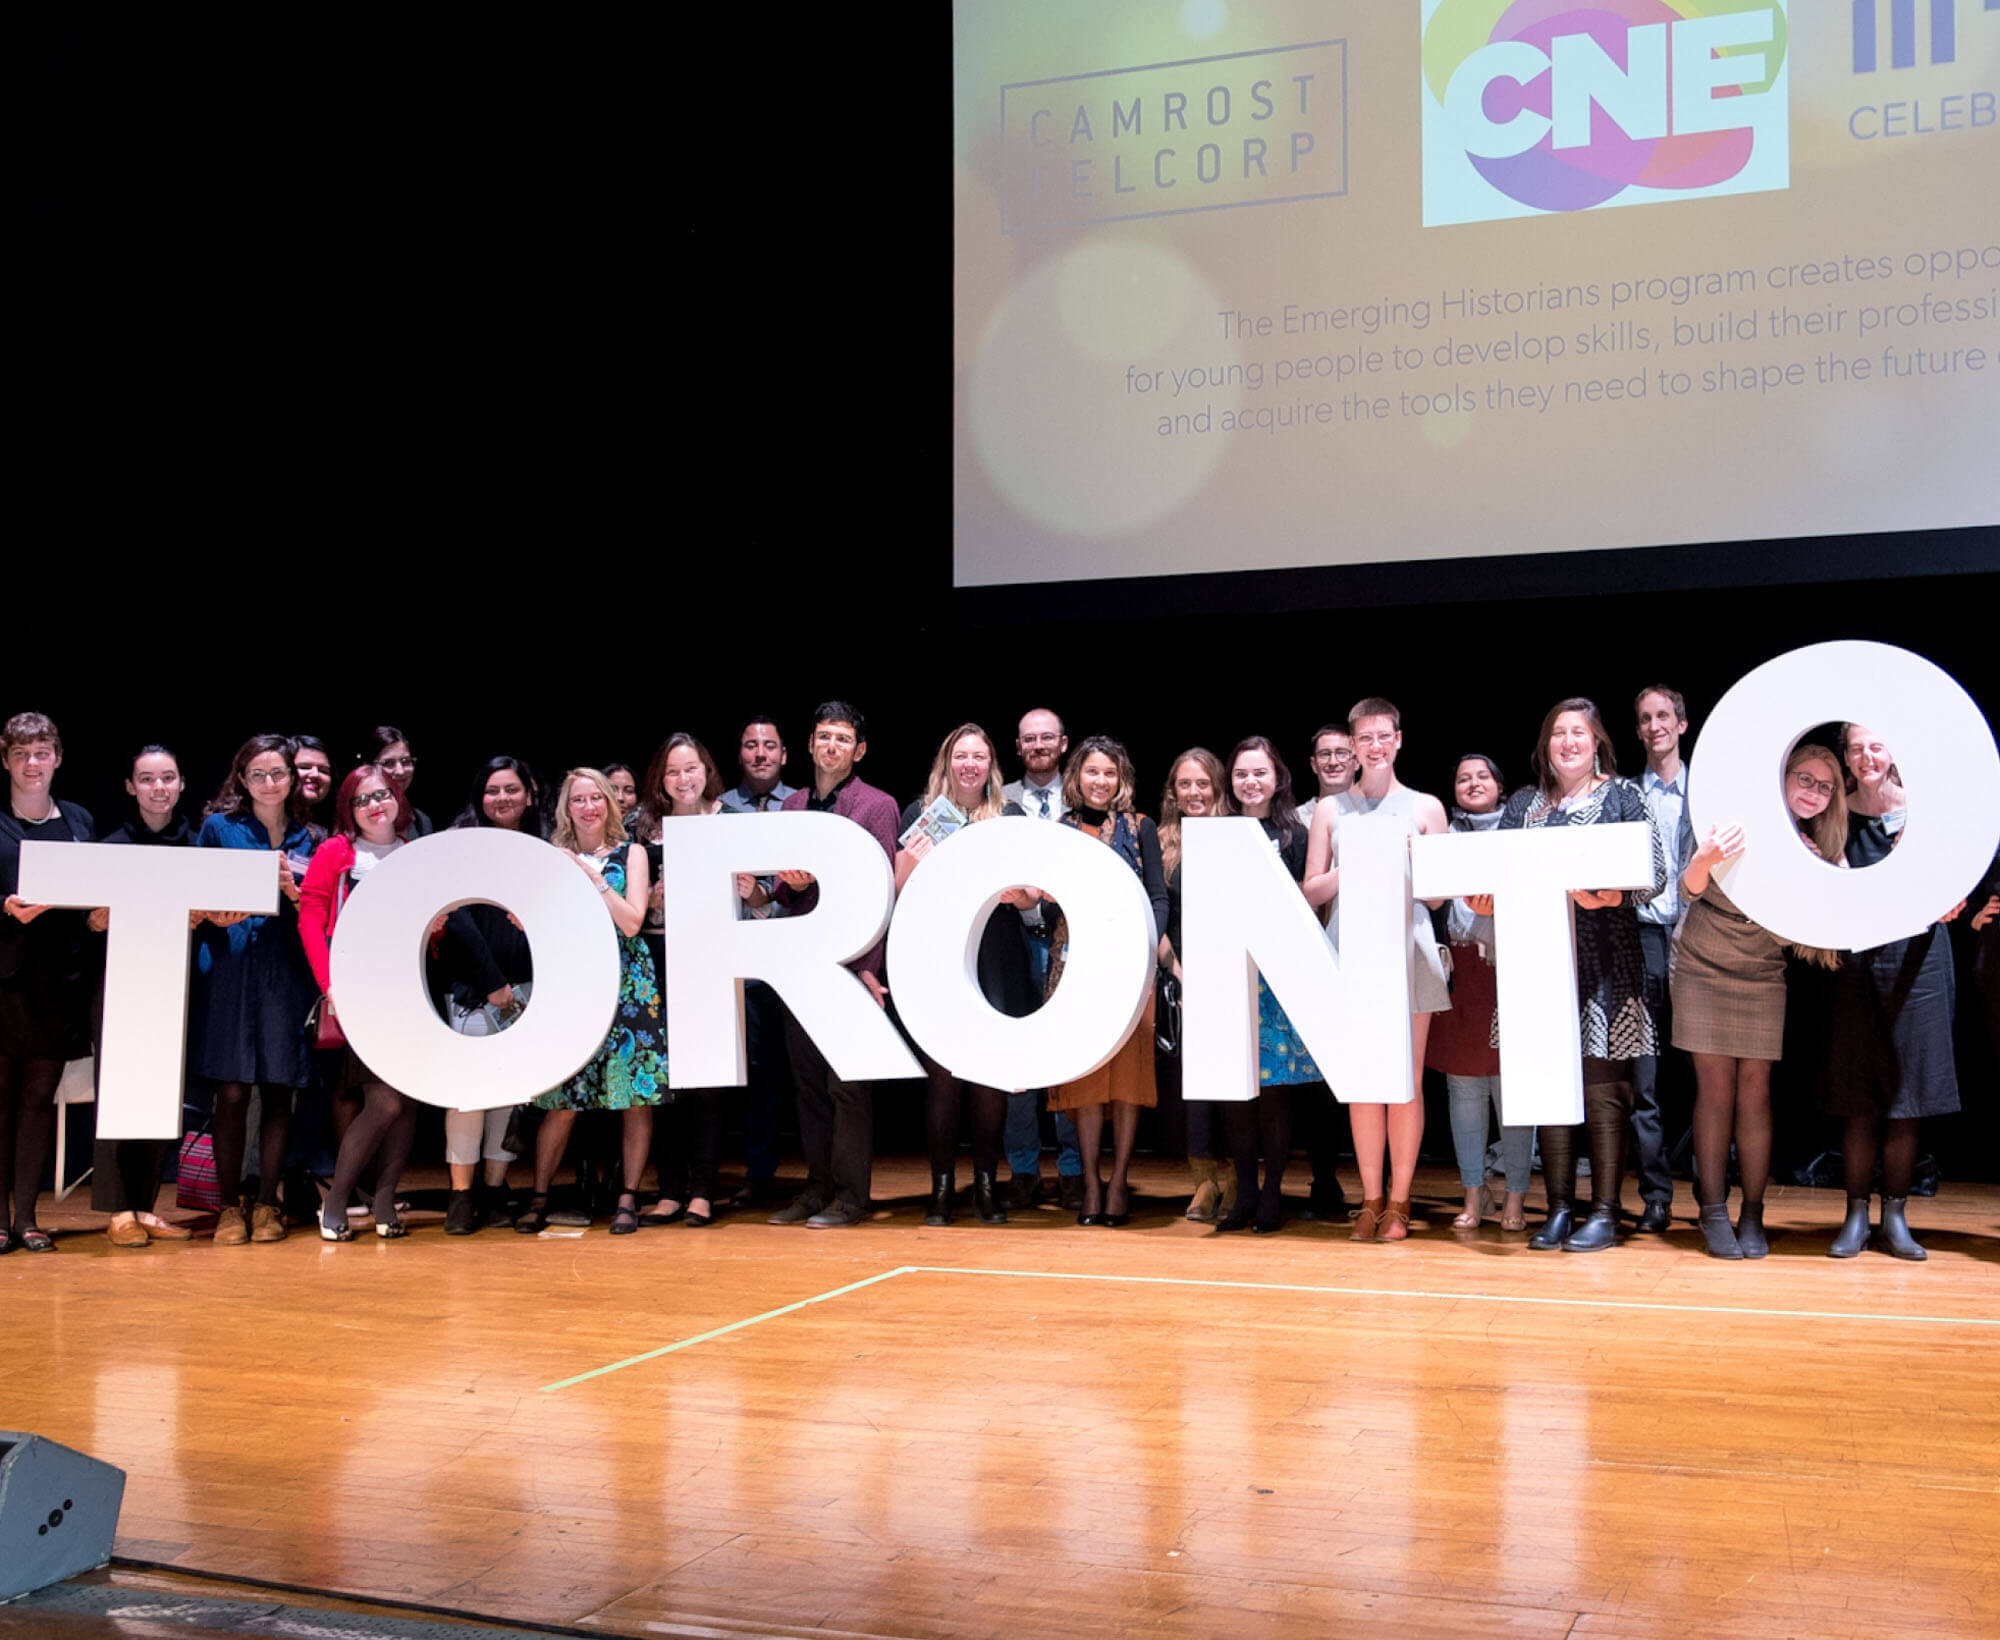 Image of 28 Emerging Historians, on stage at the 2019 Heritage Toronto Awards. They hold the letters for a mini TORONTO sign, and a projection screen appears above and behind them with logos of CNE, Tricon and Camrost Felcorp barely visible.